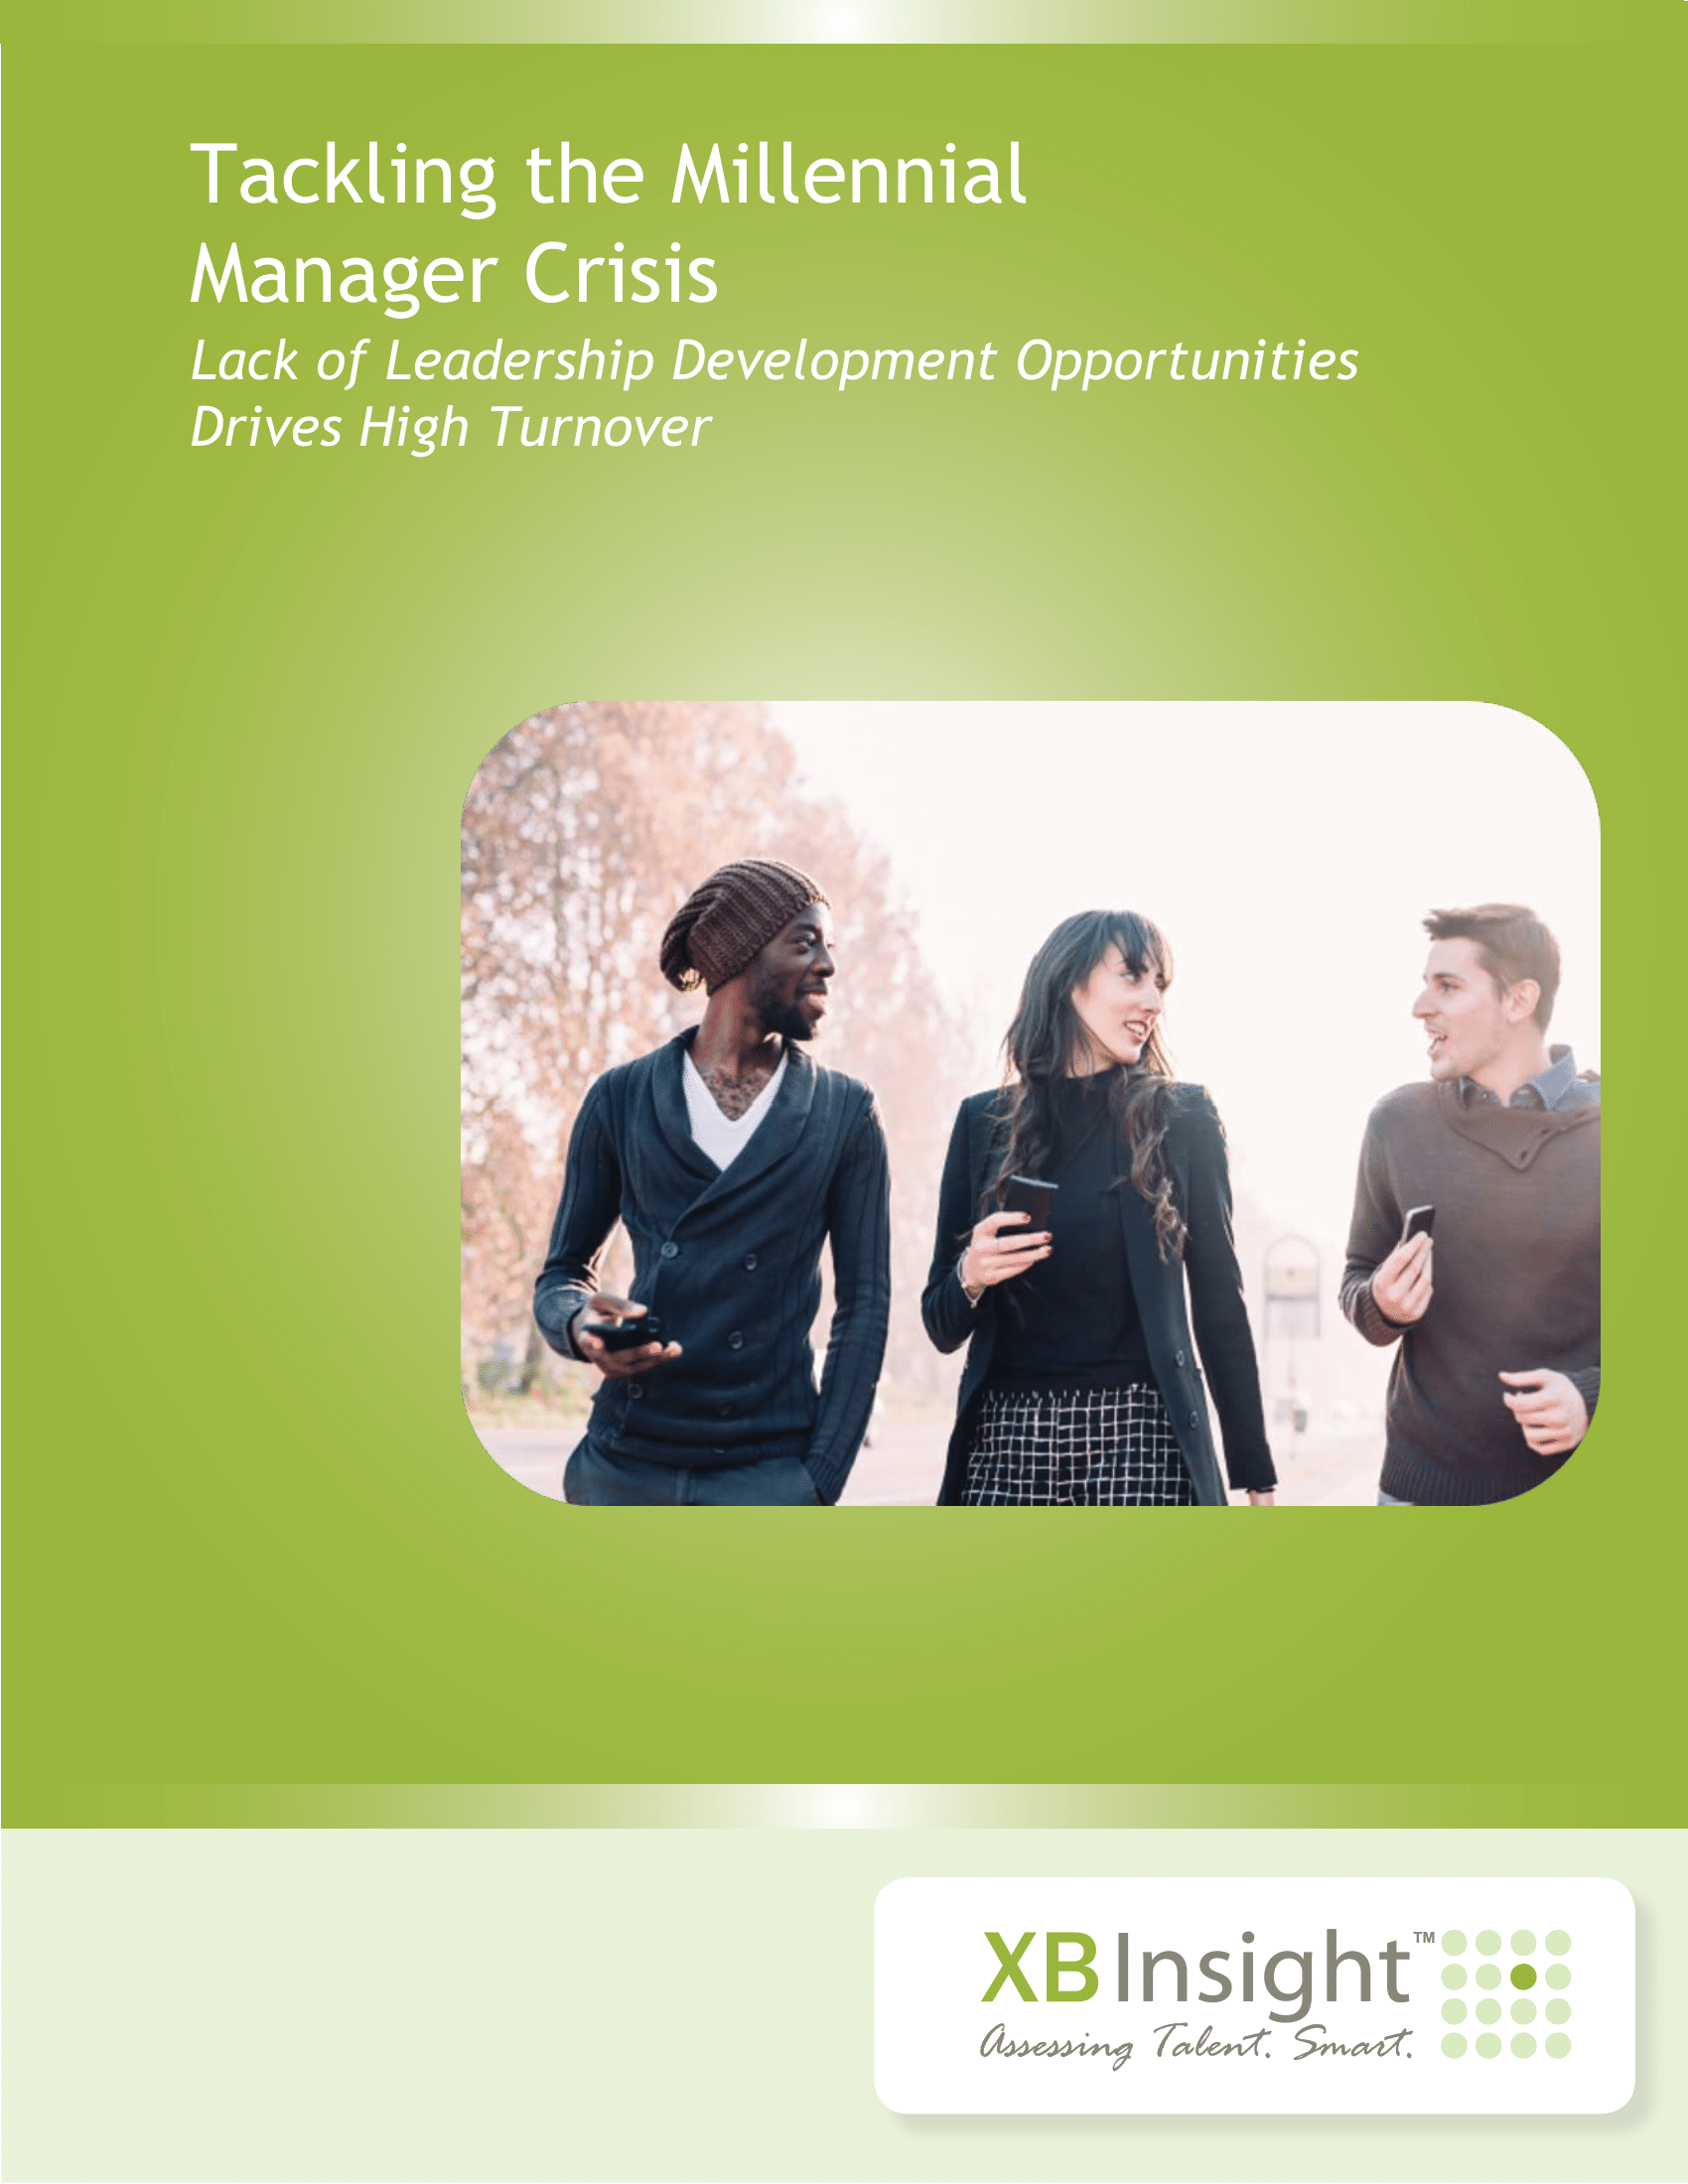 XBI-White Paper - Tackling the Millennial Manager Crisis  2-5-18-1